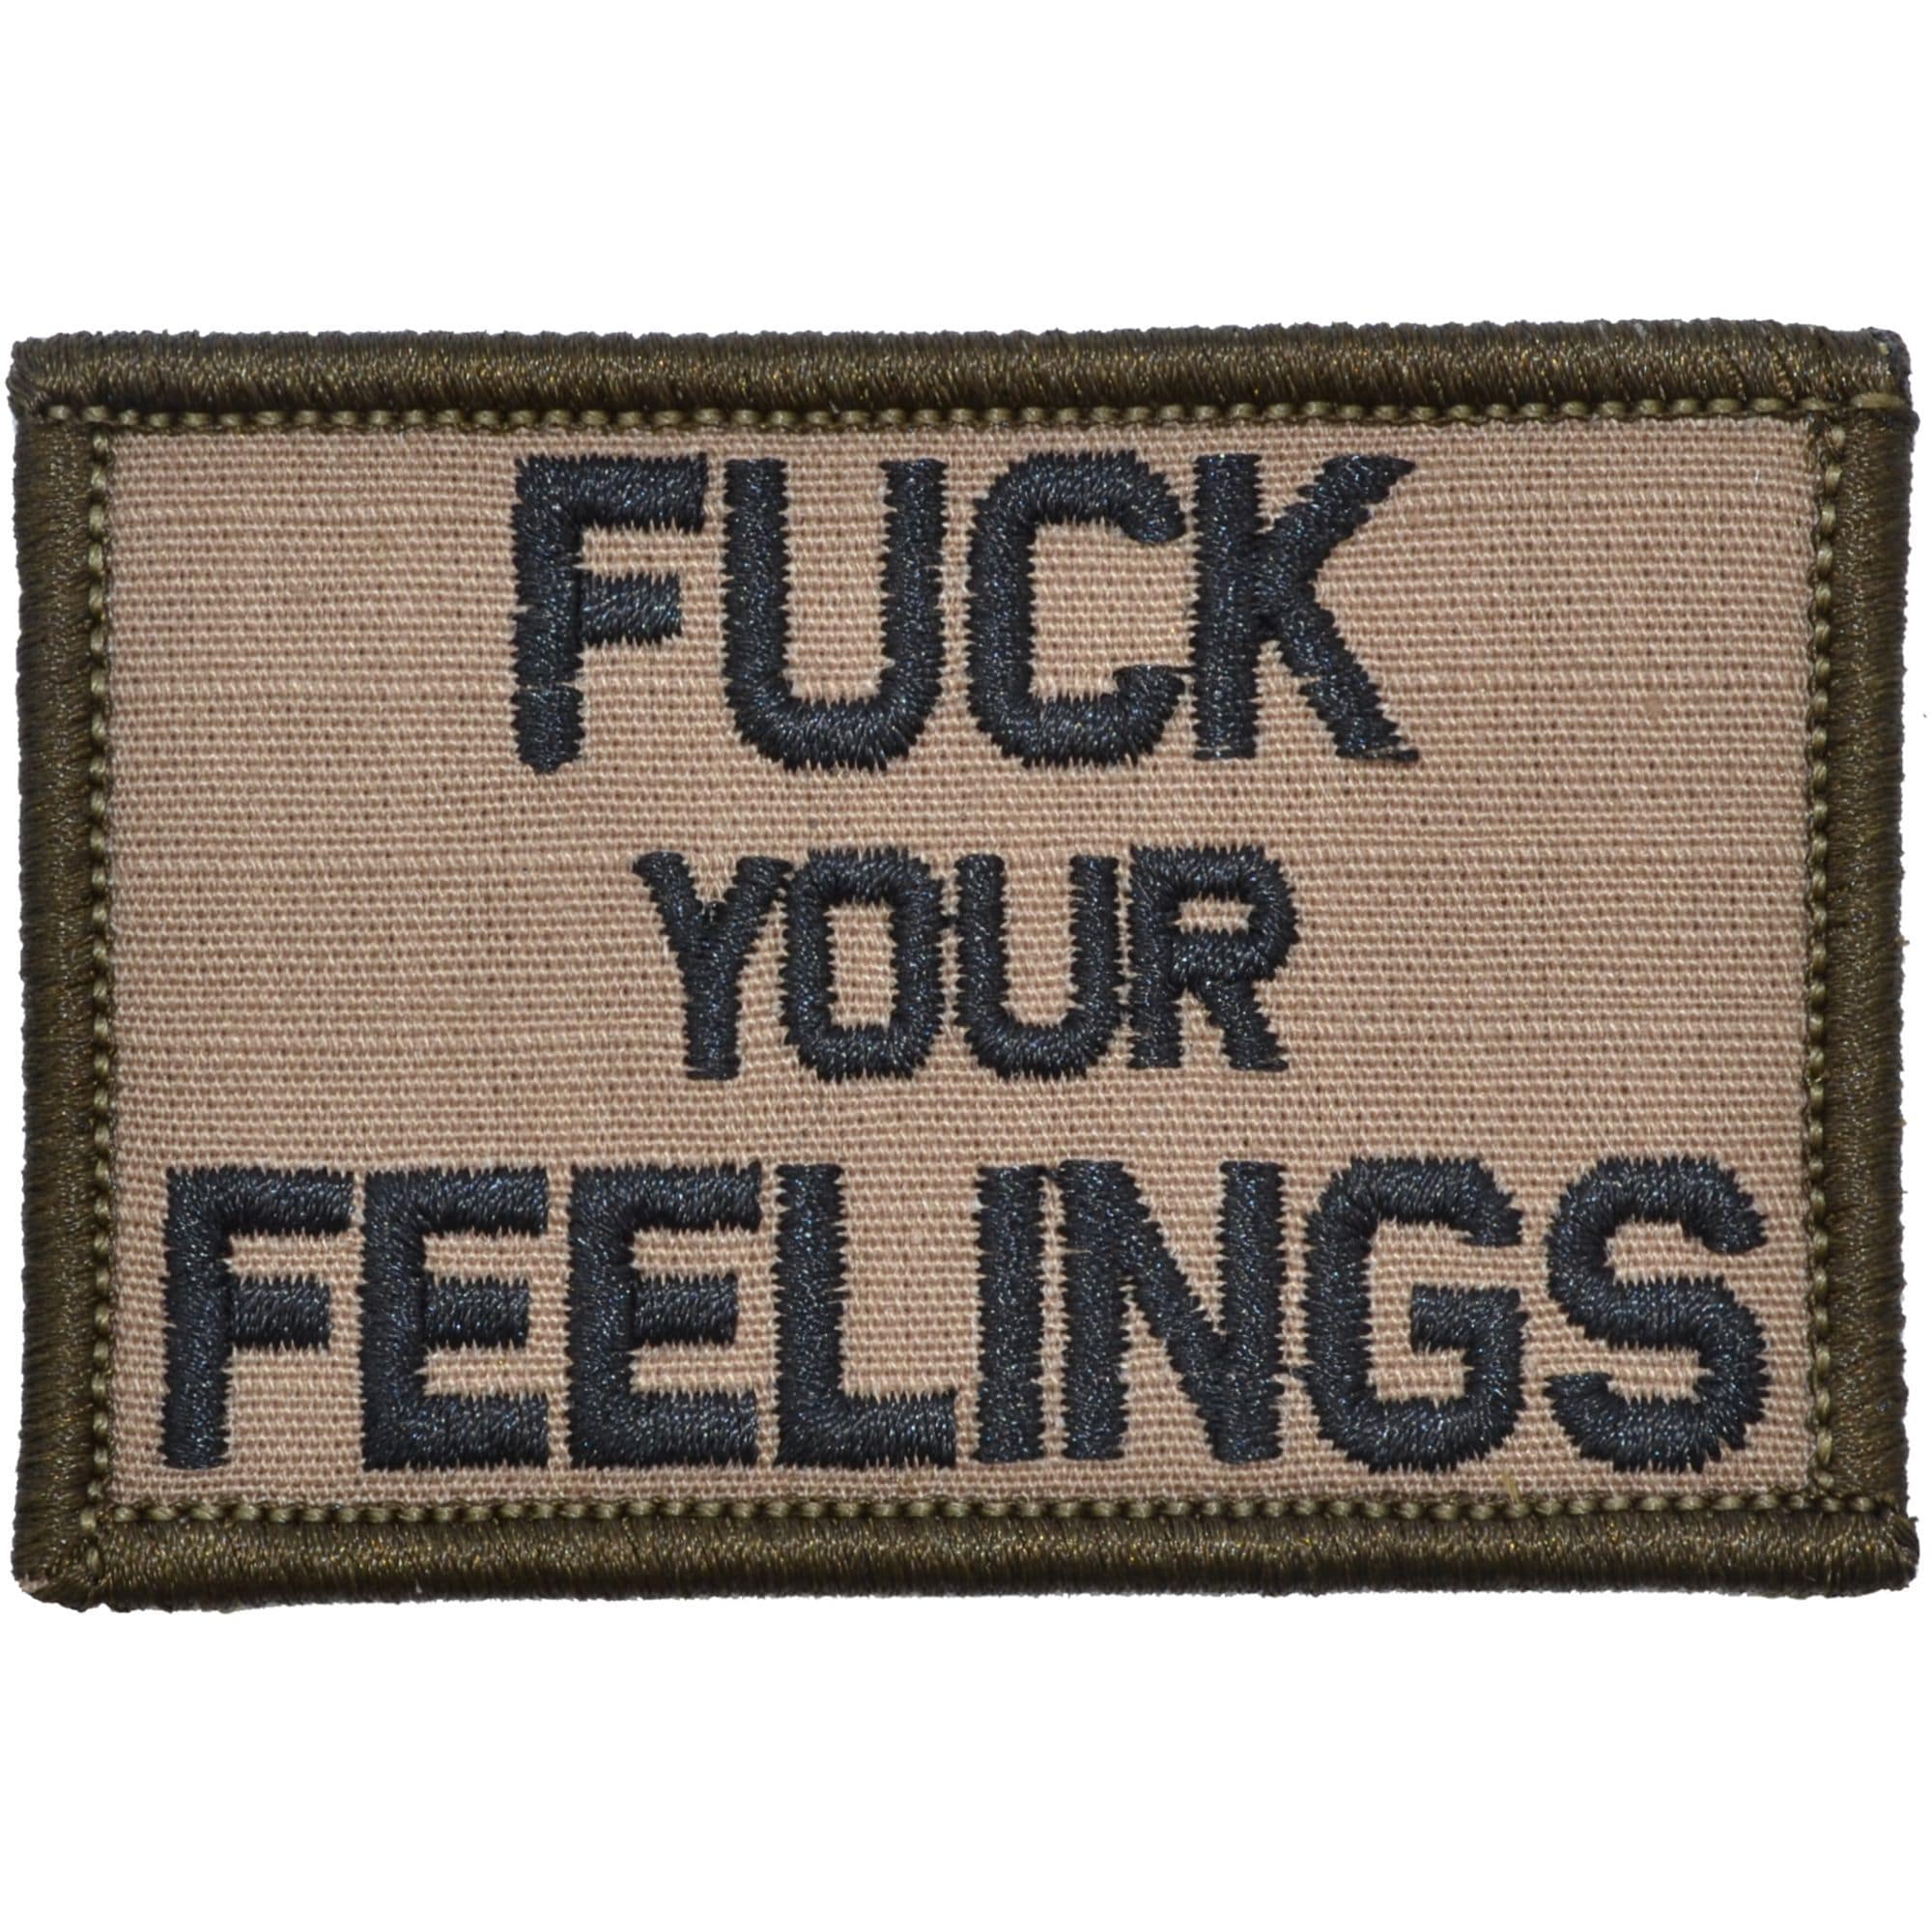 Tactical Gear Junkie Patches Coyote Brown w/ Black Fuck Your Feelings - 2x3 Patch